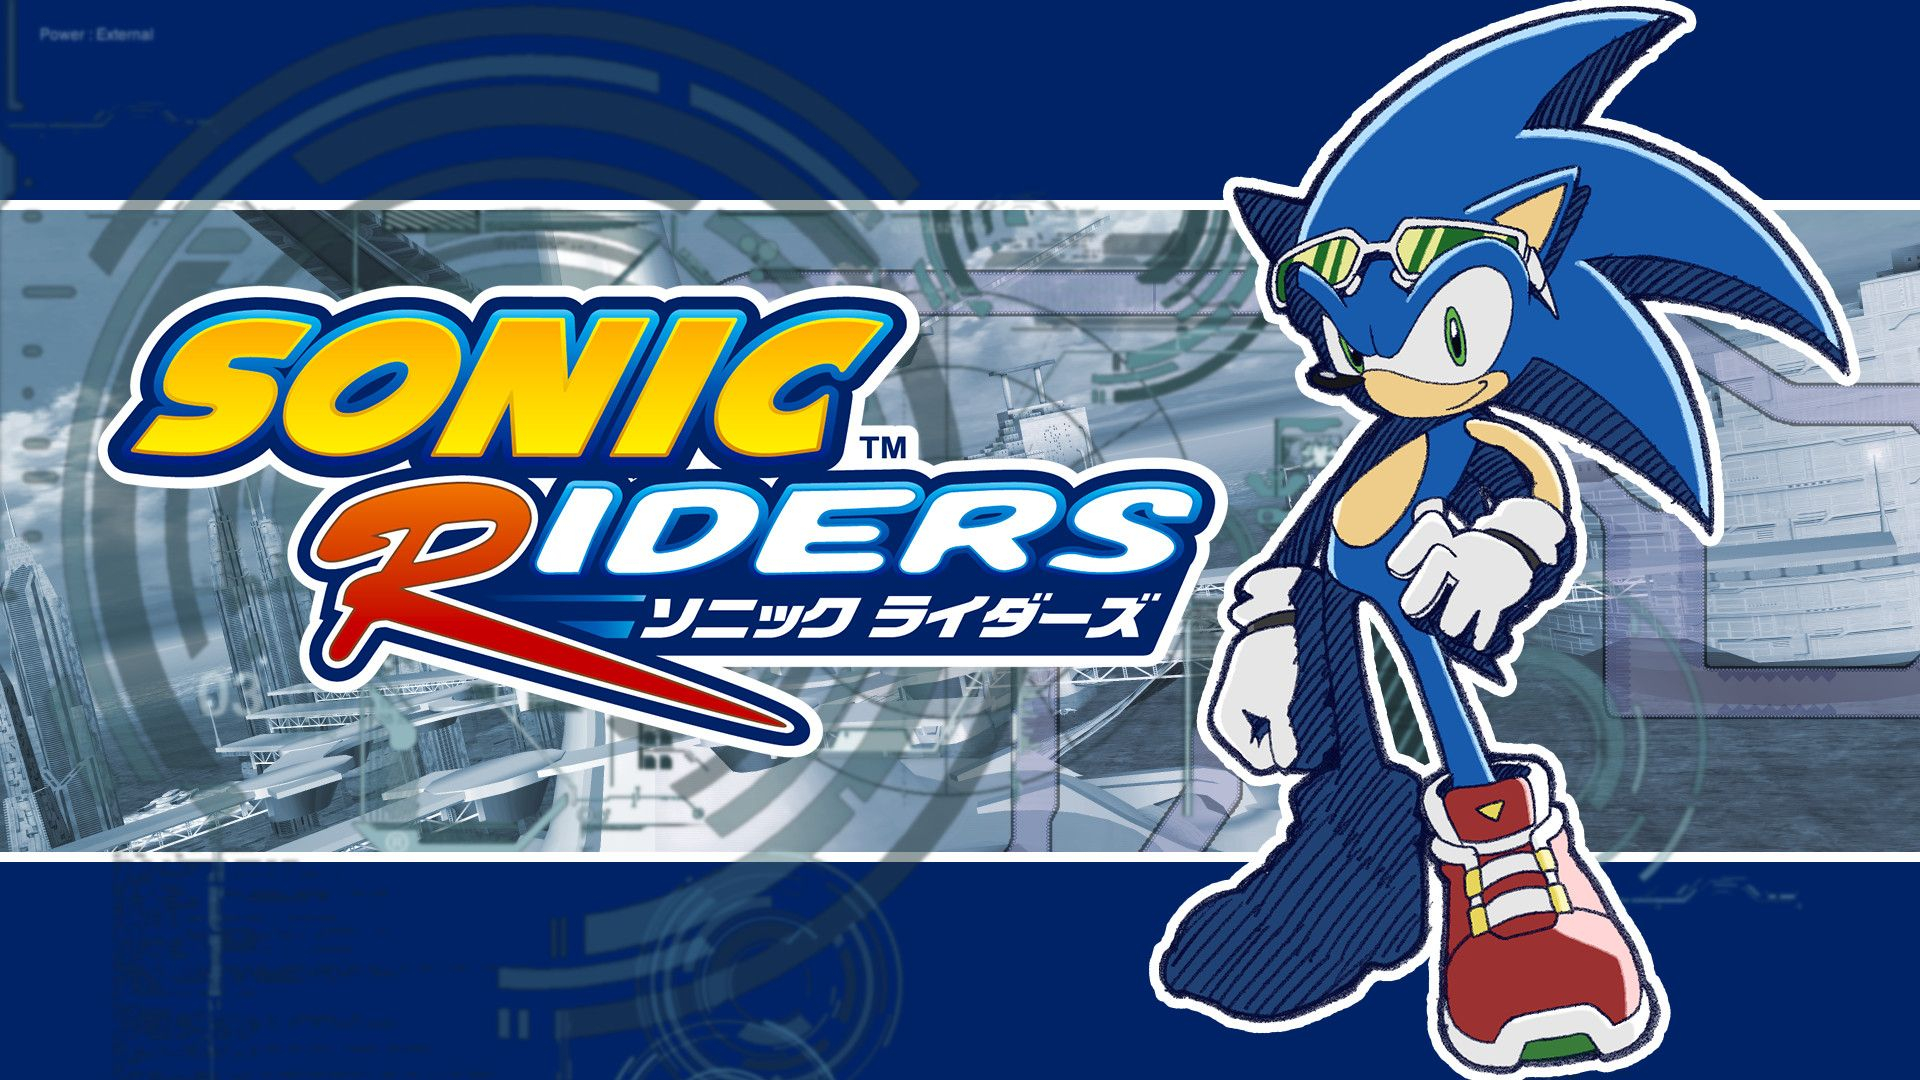 1920x1080 Sonic Riders Wallpapers Top Free Sonic Riders Backgrounds